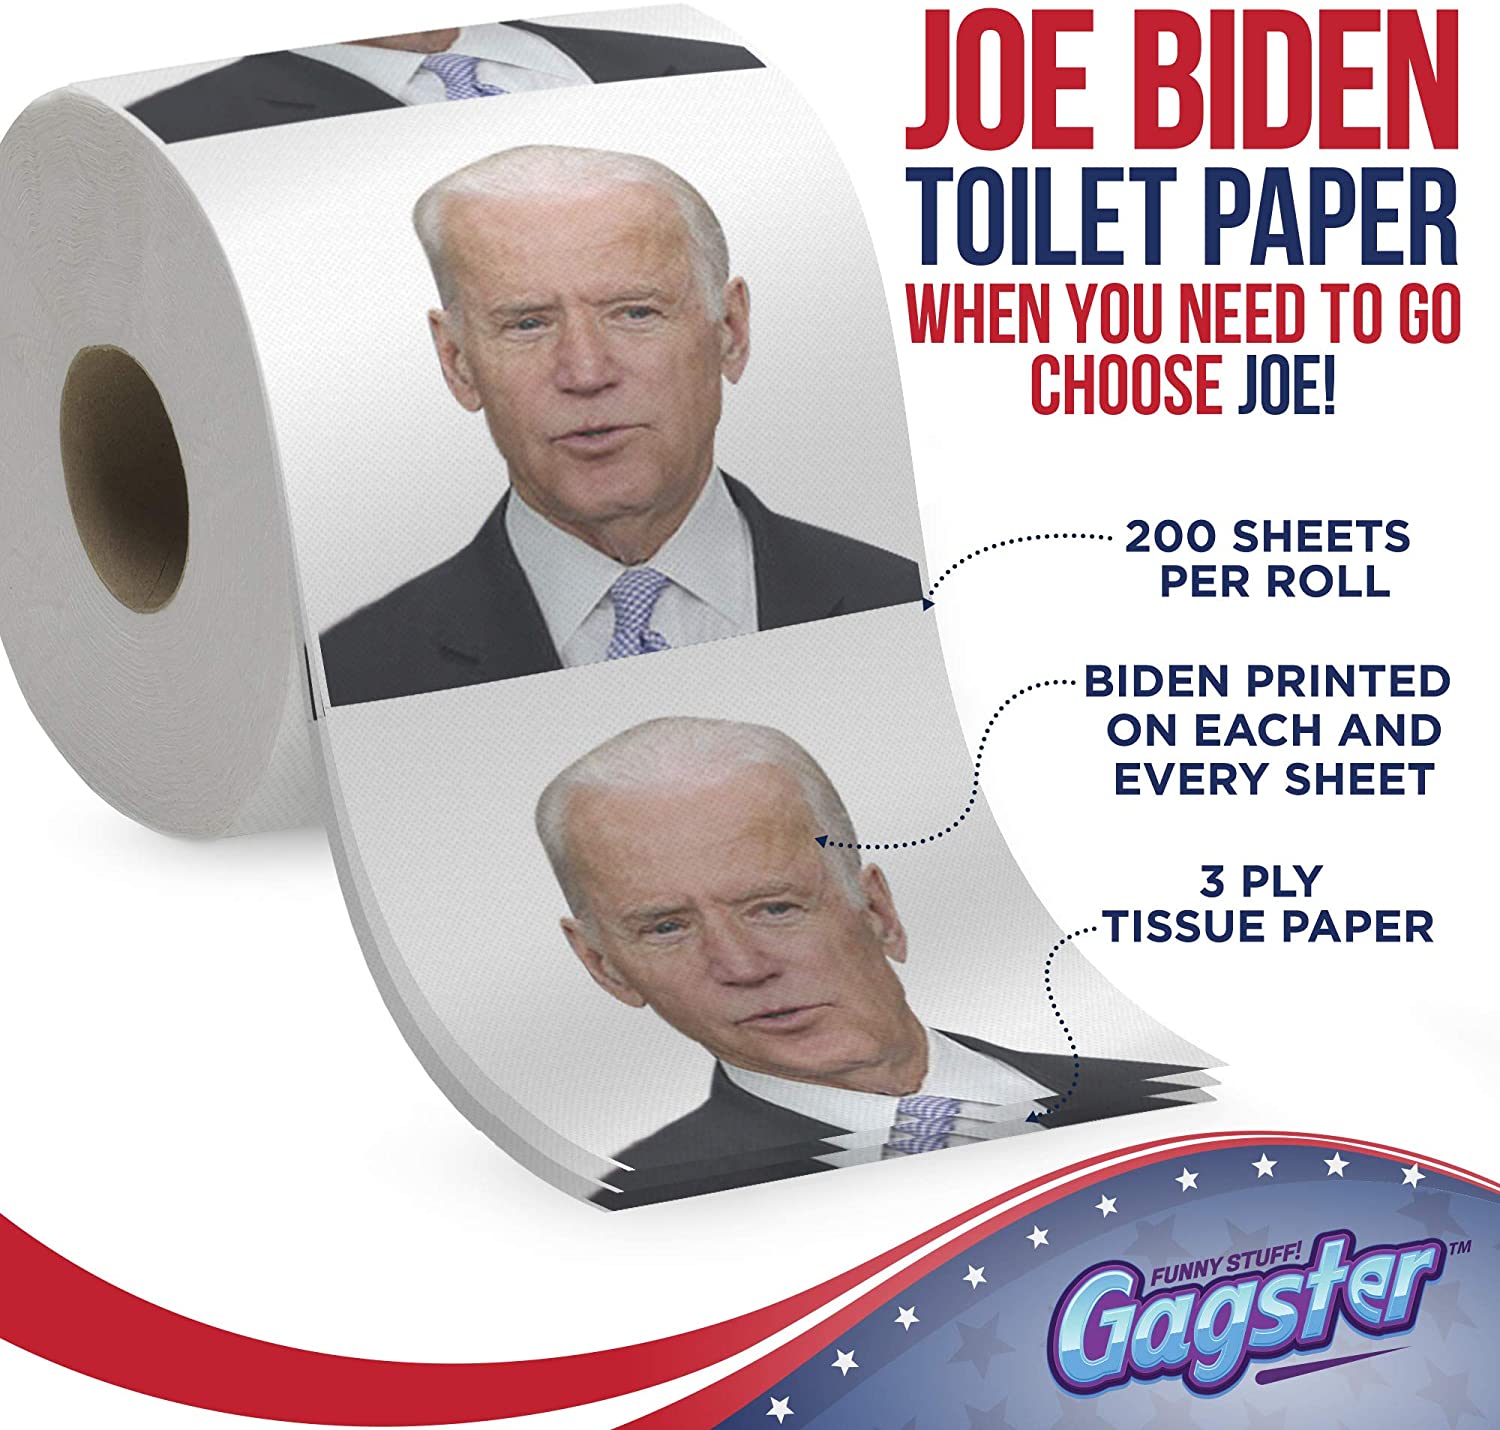 https://rare.us/wp-content/uploads/sites/3/2021/01/2-Joe-Biden-Toilet-Paper-Roll-Funny-Political-Novelty-Gag-Gift-3-Ply-Bathroom-Tissue-200-Sheets-in-Each-Roll-Laugh-Out-Loud-Joke-with-Image-Printed-on-Every-Sheet-Hilarious-White-Elephant-Idea-.jpg?resize=150